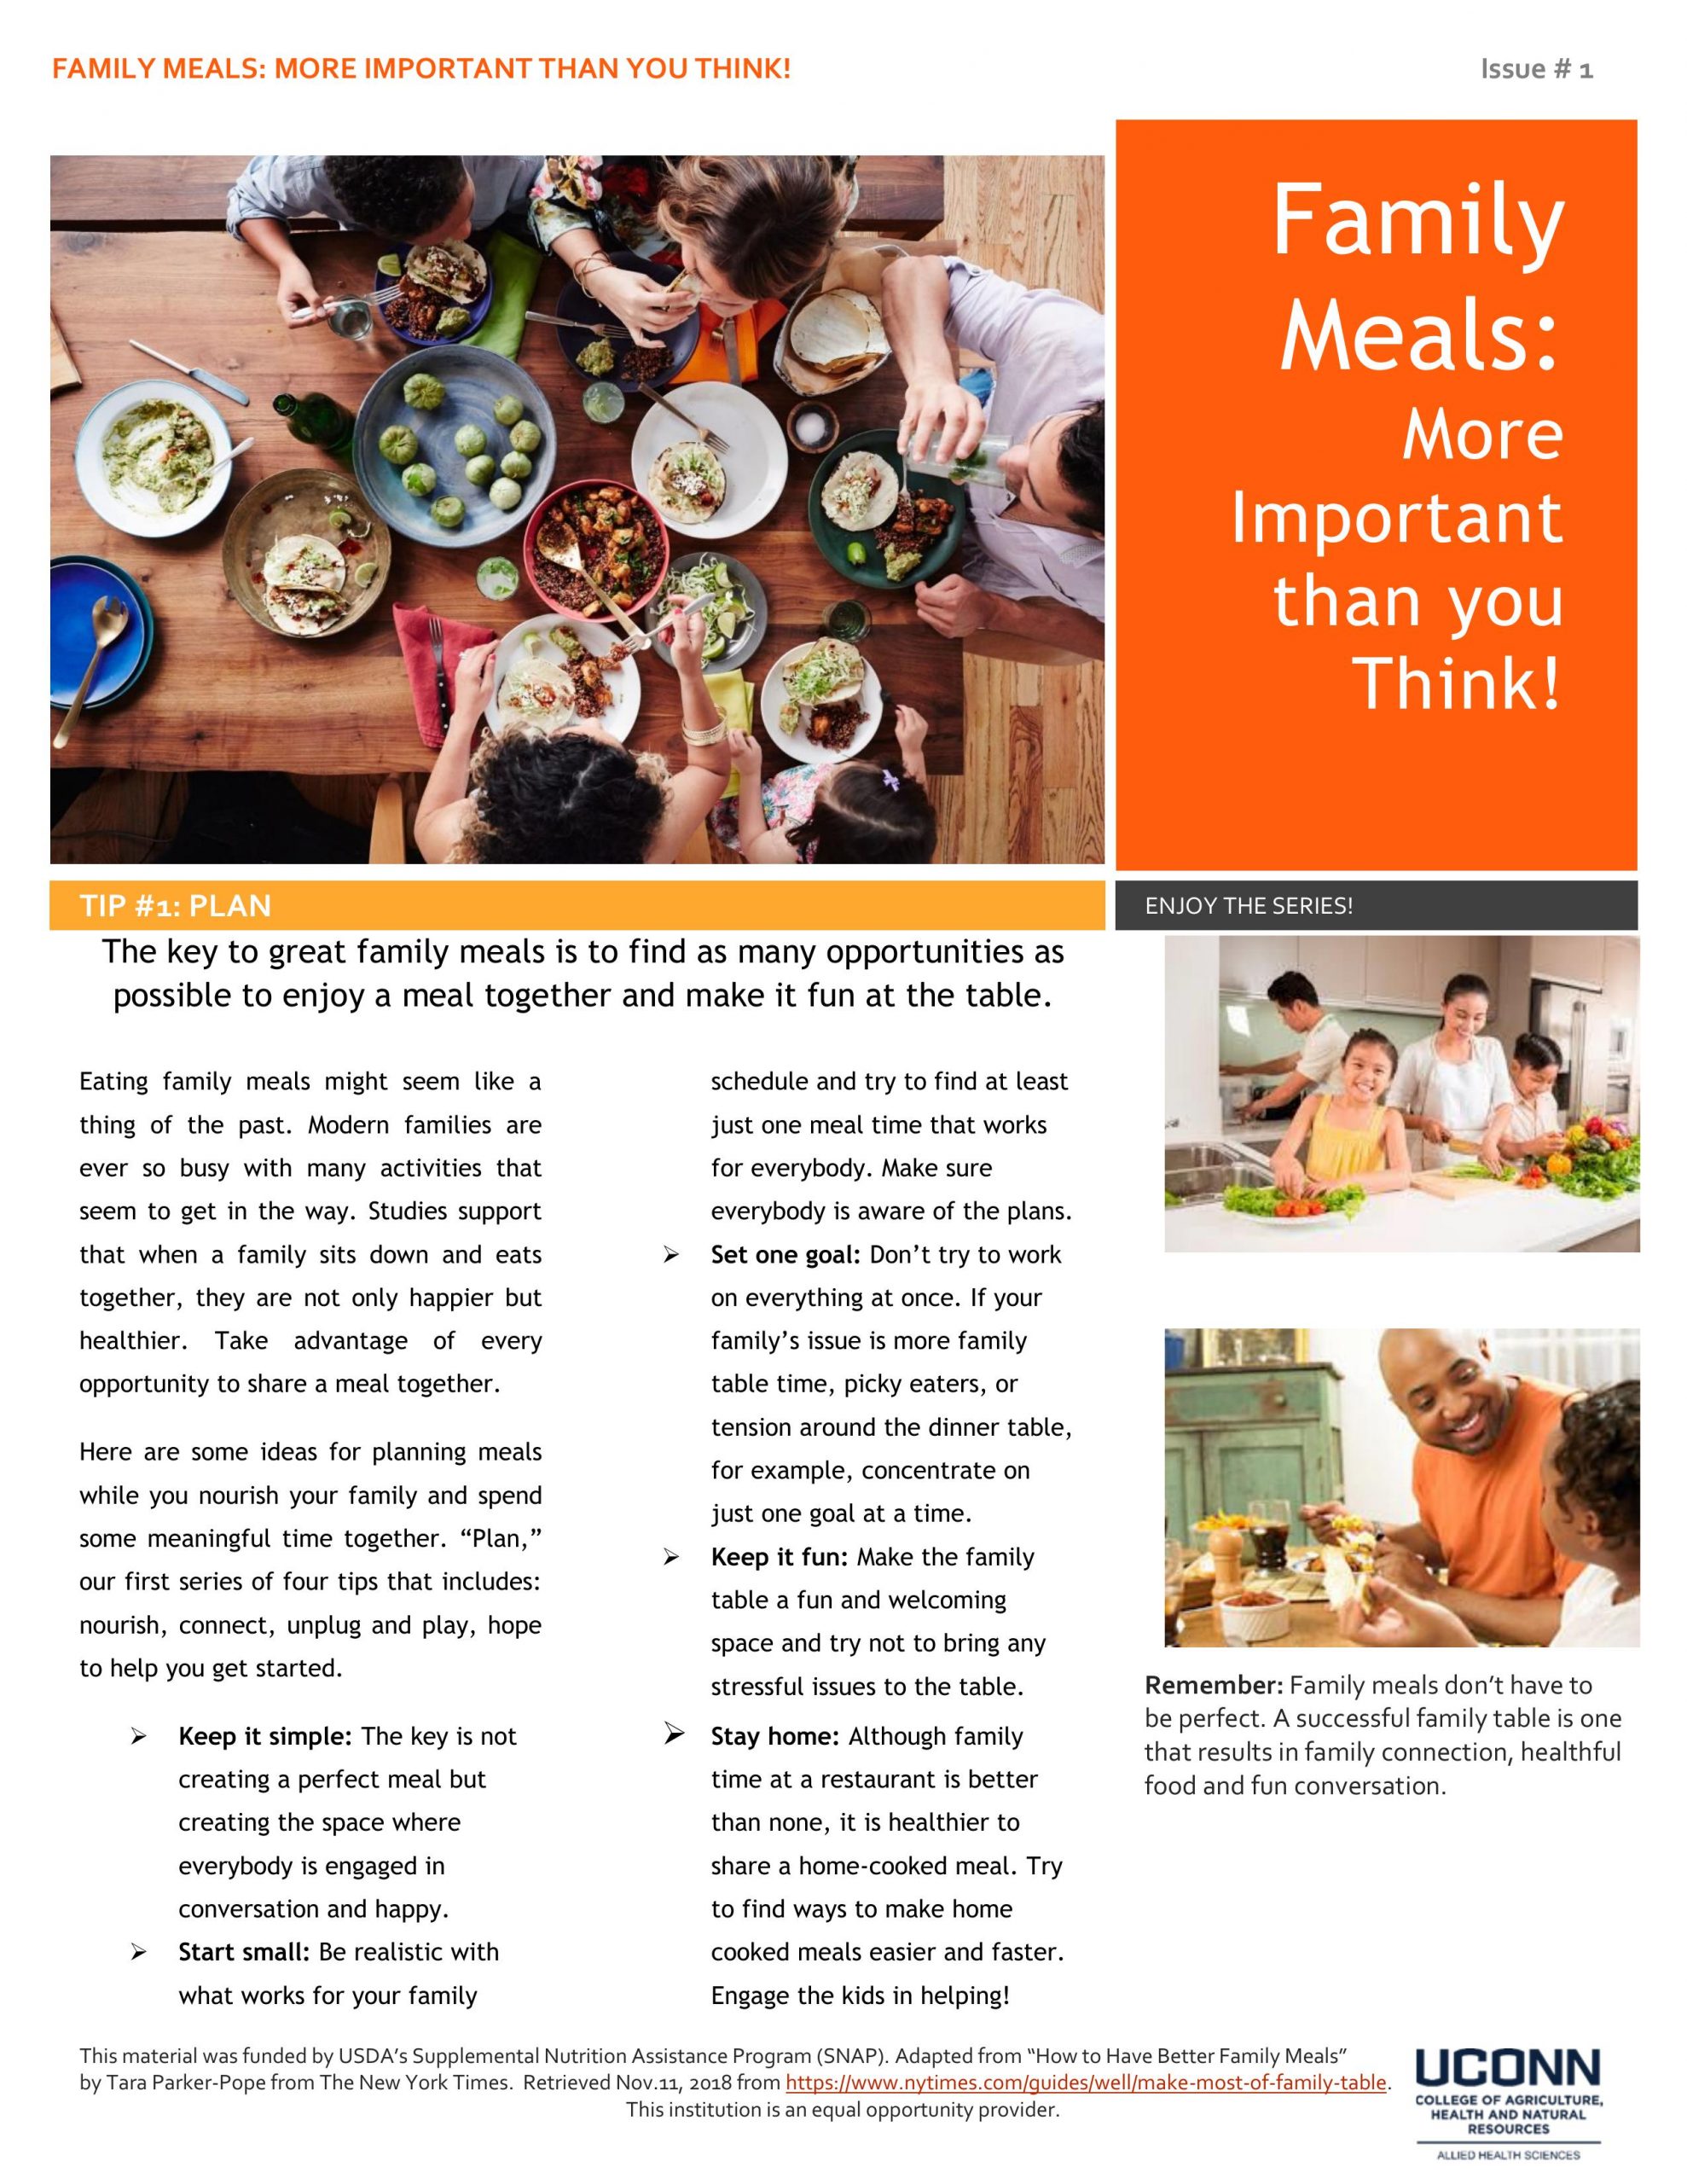 Healthy nutrition and community – more than just a common meal